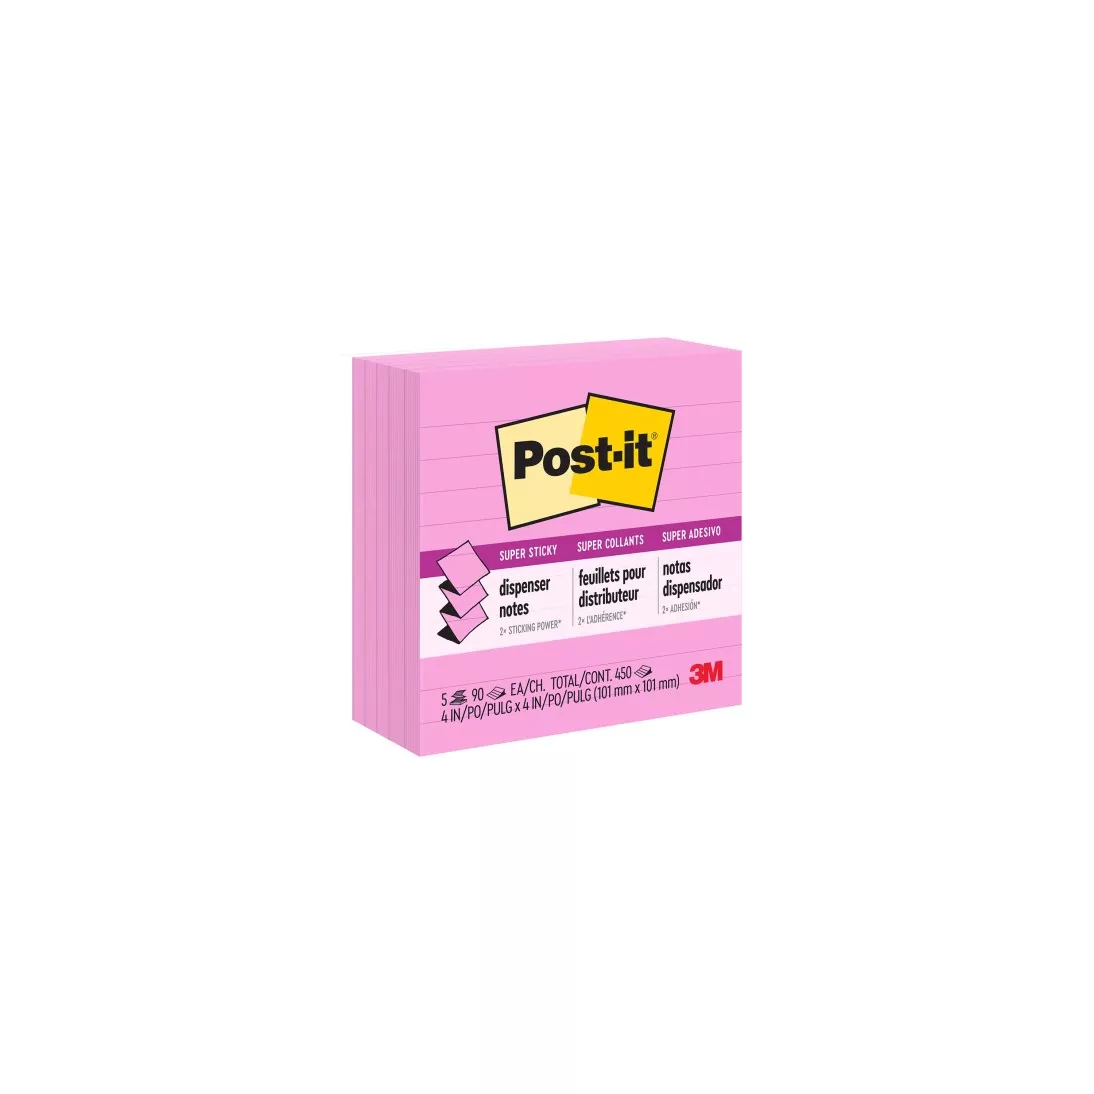 Post-it® Super Sticky Pop-up Notes R440-NPSS, 4 in x 4 in (101 mm x 101
mm)